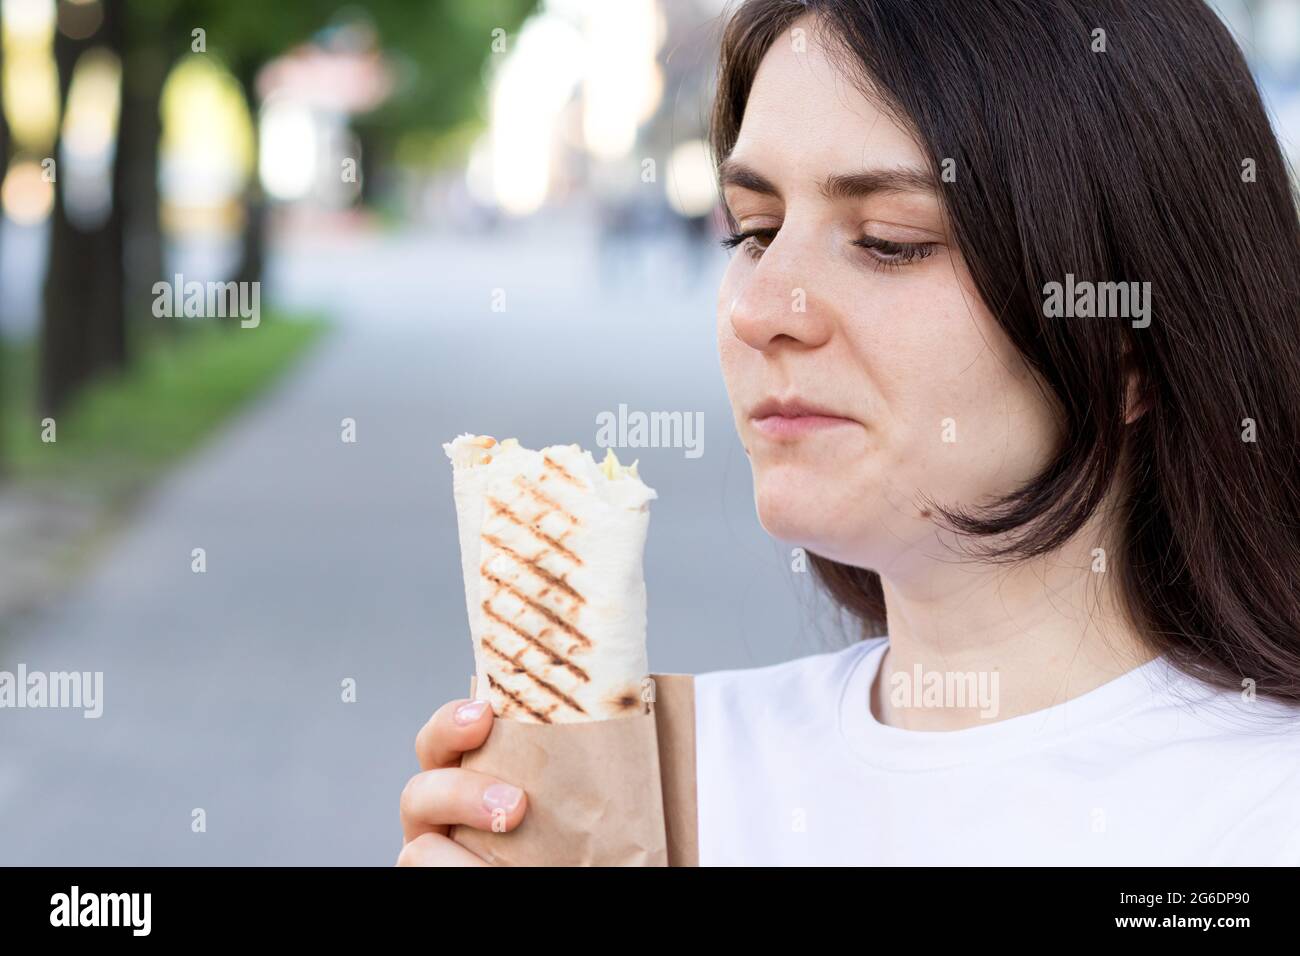 Brunette woman overeats shawarma on a city street. Street fast food pita roll with meat and vegetables Stock Photo